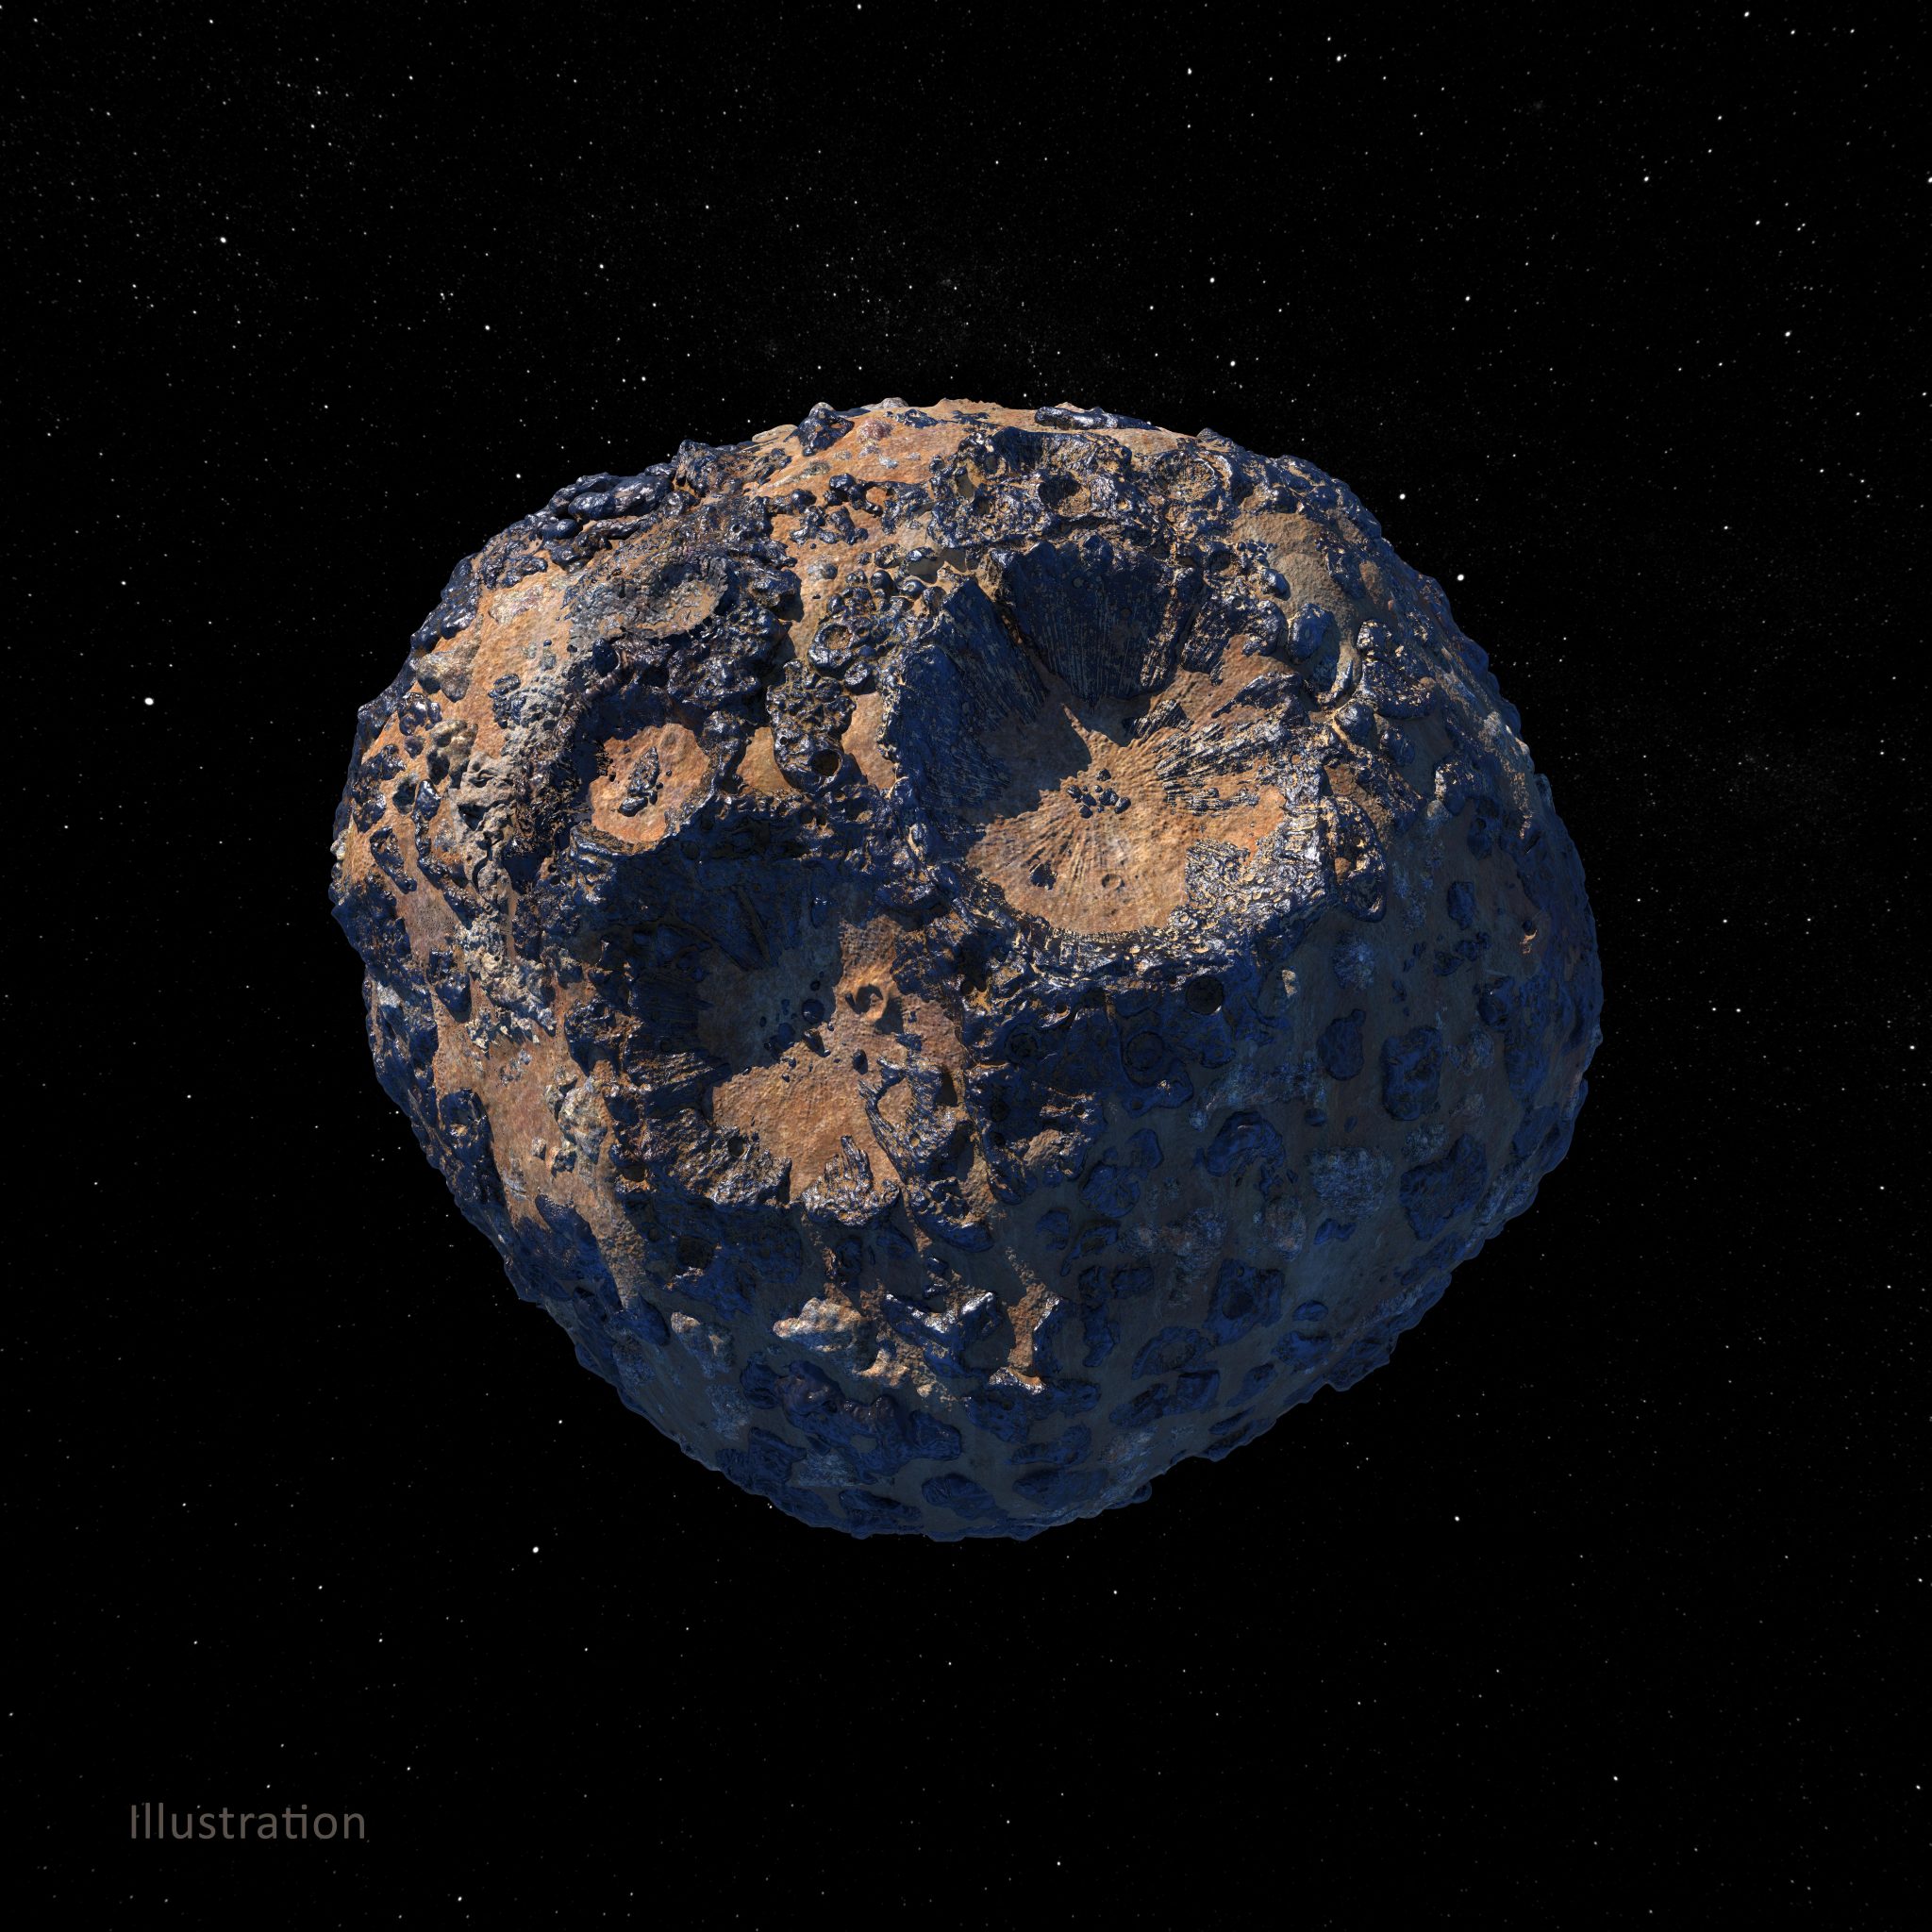 The dark rocky and metallic Psyche asteroid appears covered with large and small craters in this illustration. Some of the craters have a lighter brown material in them. The asteroid is illuminated from the upper left.